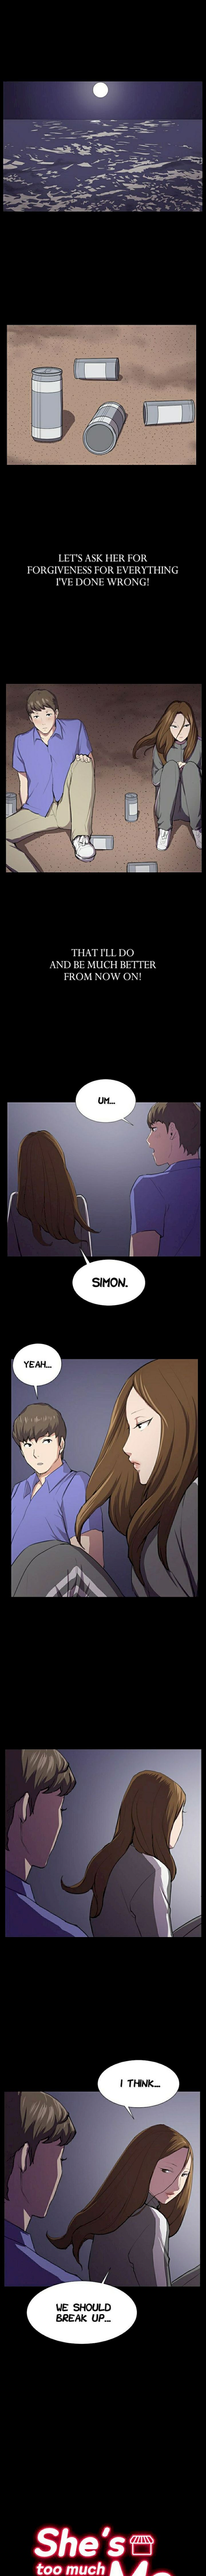 Backstreet Rookie (She's too much for Me) - Chapter 41 Page 1